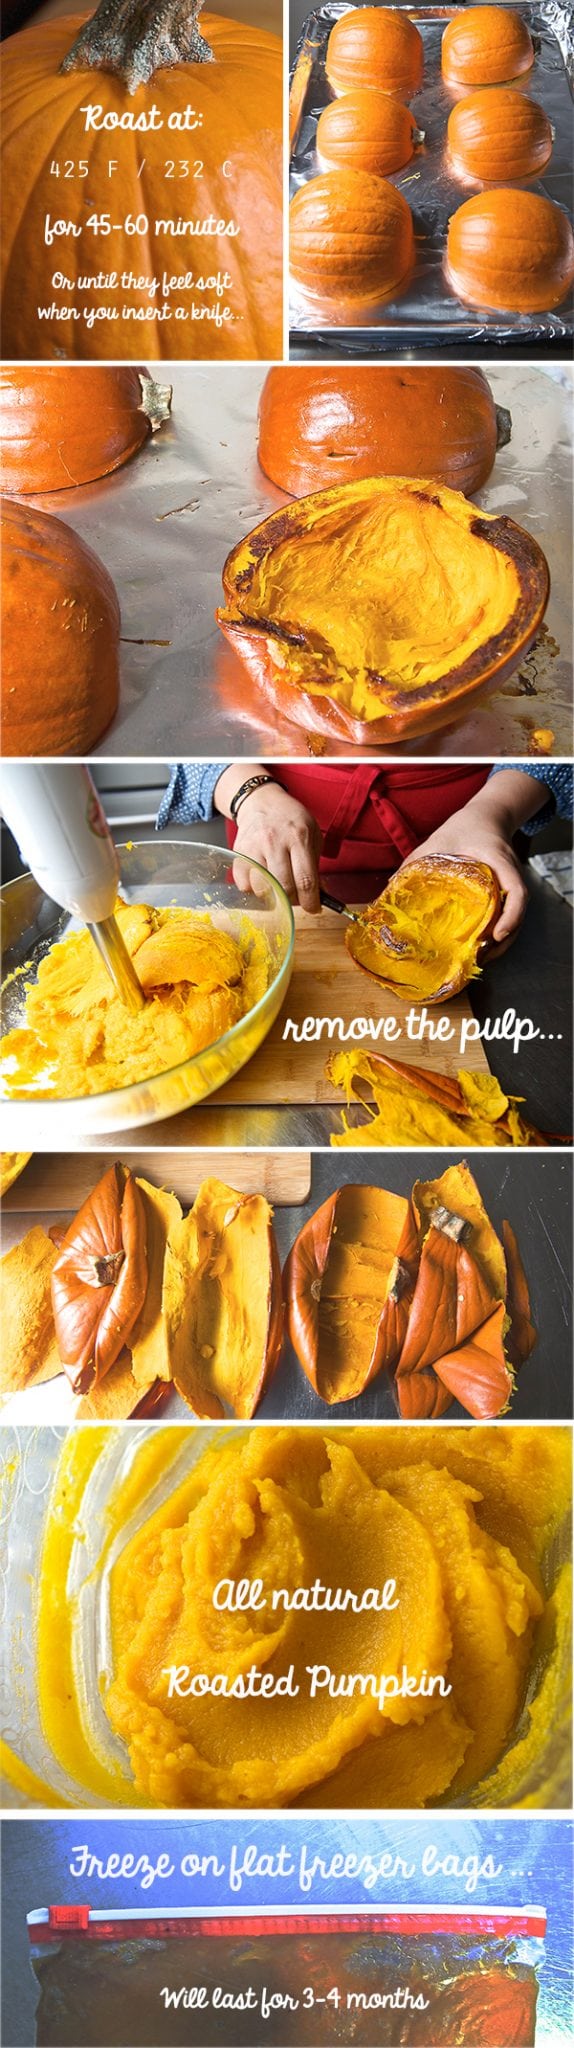 How-to-roast-a-pumpkin-101_Yes,-more-please!-Recovered